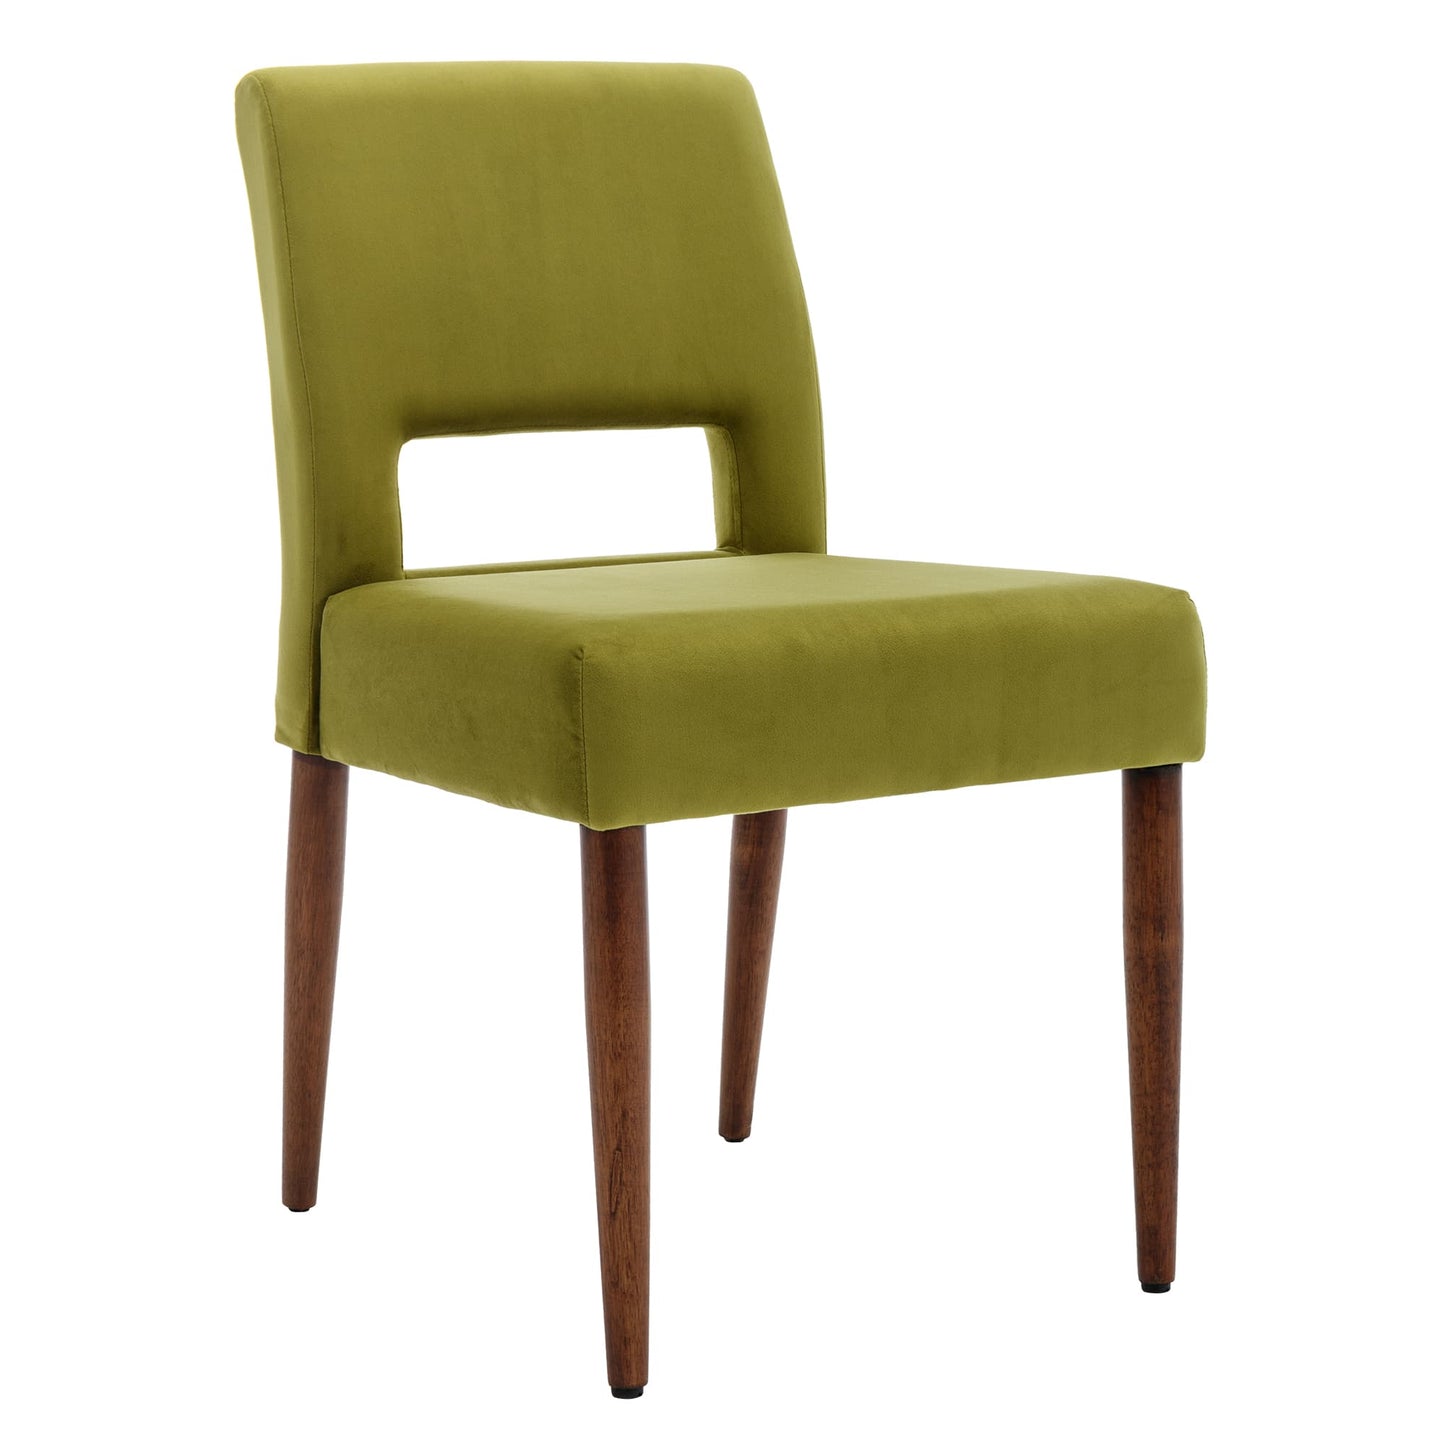 SogesPower Accent Chairs Set of 2, Velvet Chairs with Solid Wood and Upholstered- Green